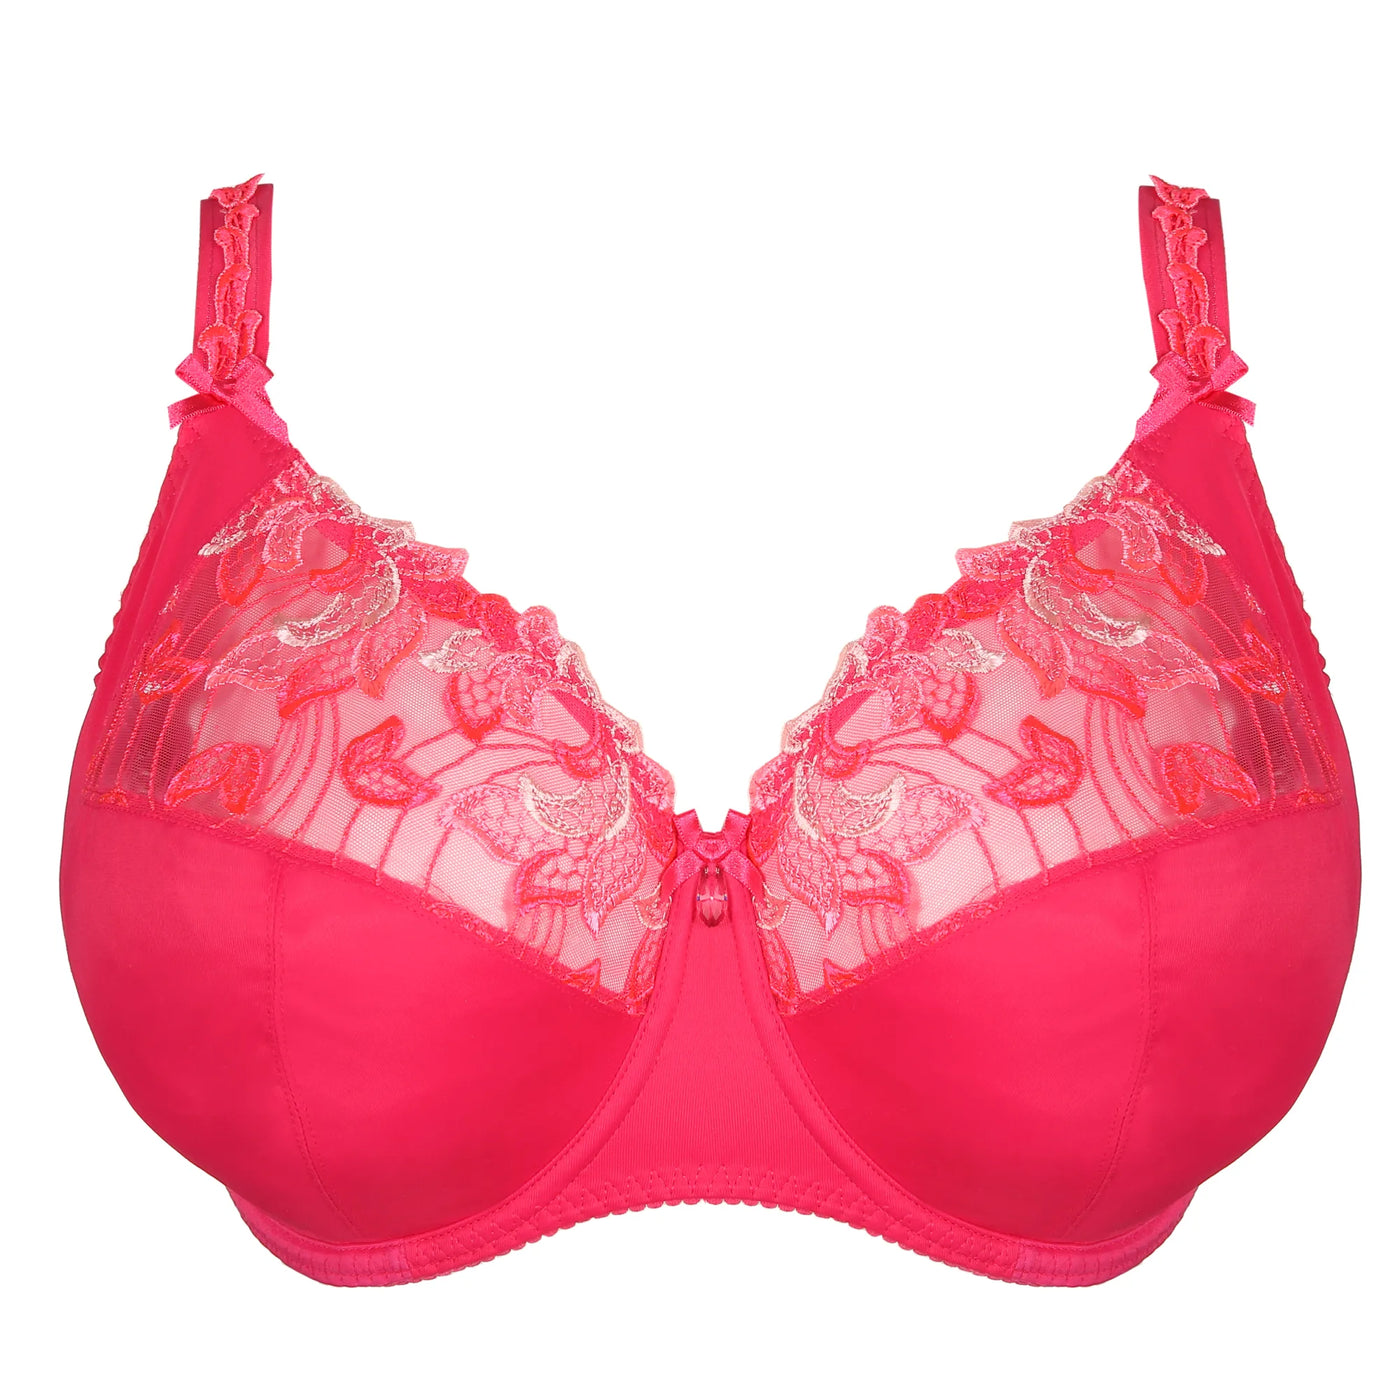 Primadonna Deauville full cup bra Amour